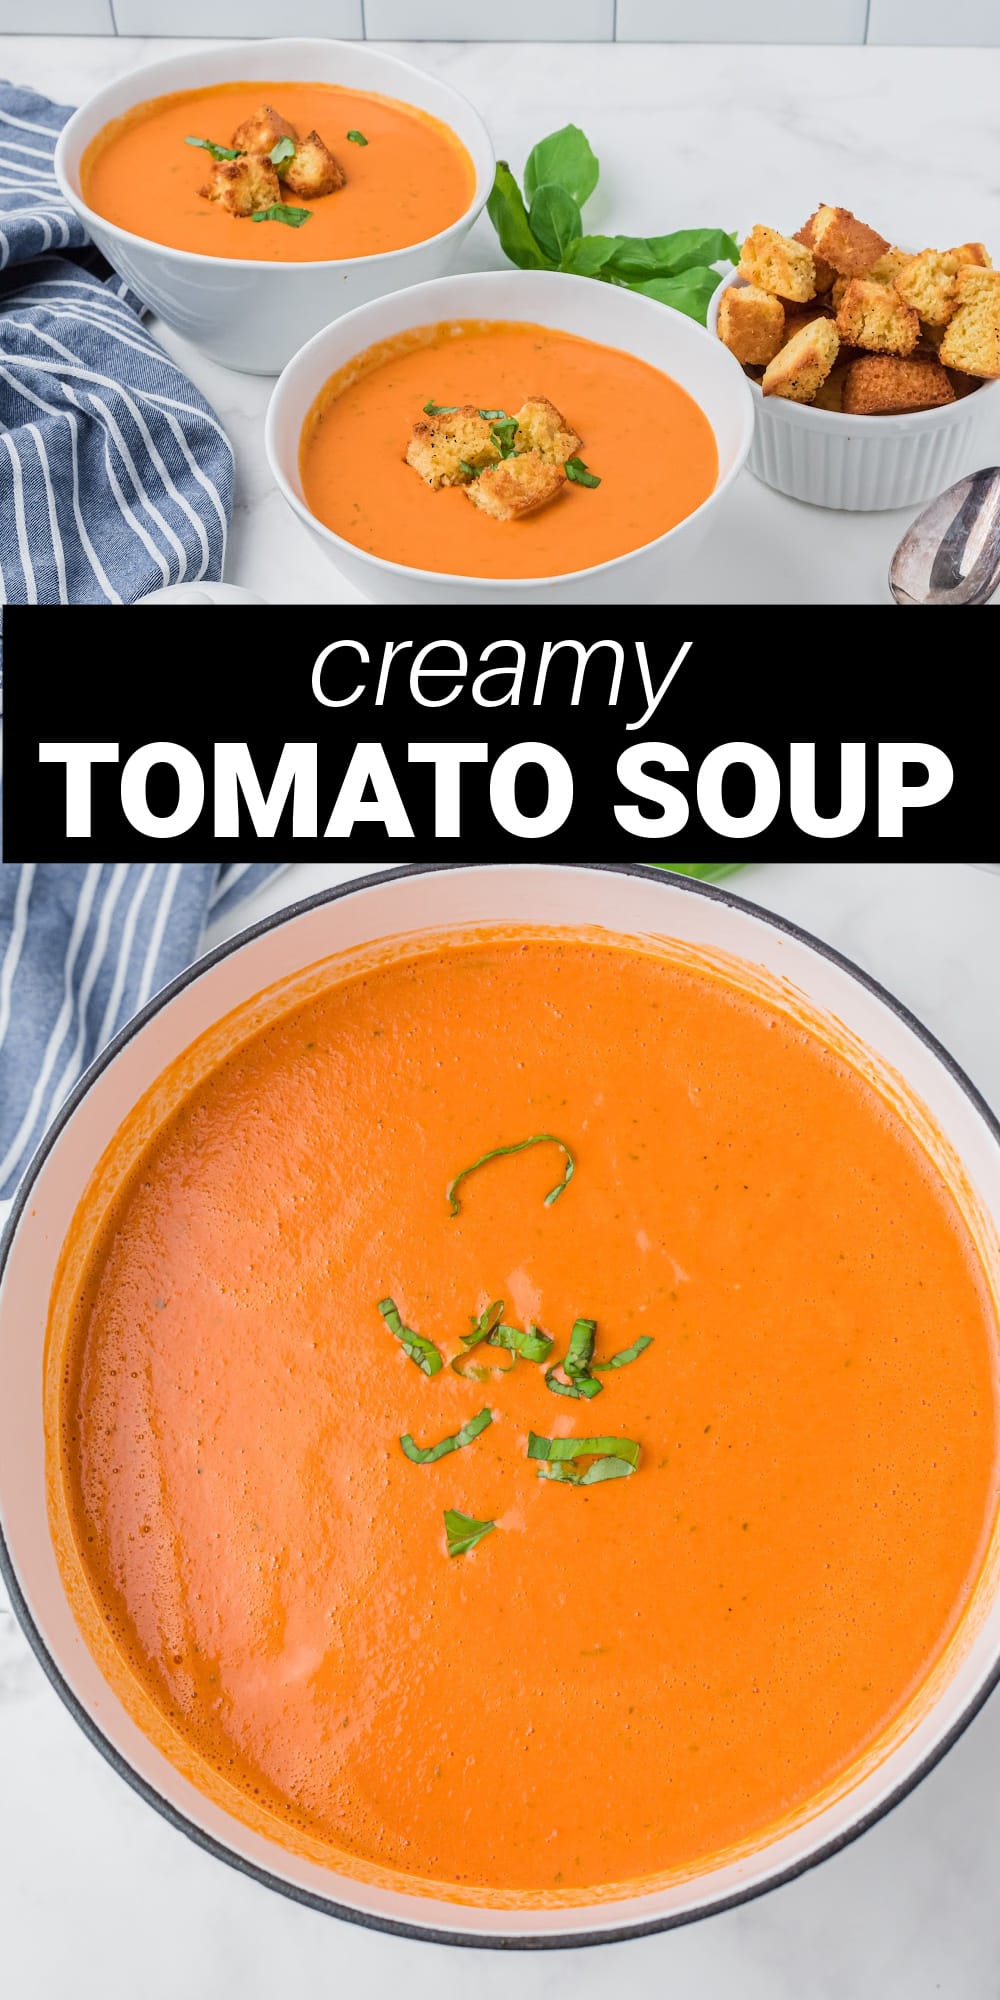 This Creamy Tomato Soup recipe is loaded with the most amazing rich and robust favors. Easy to prepare with just a few simple ingredients, this warm and inviting classic comfort food is perfect for a busy weeknight meal. 